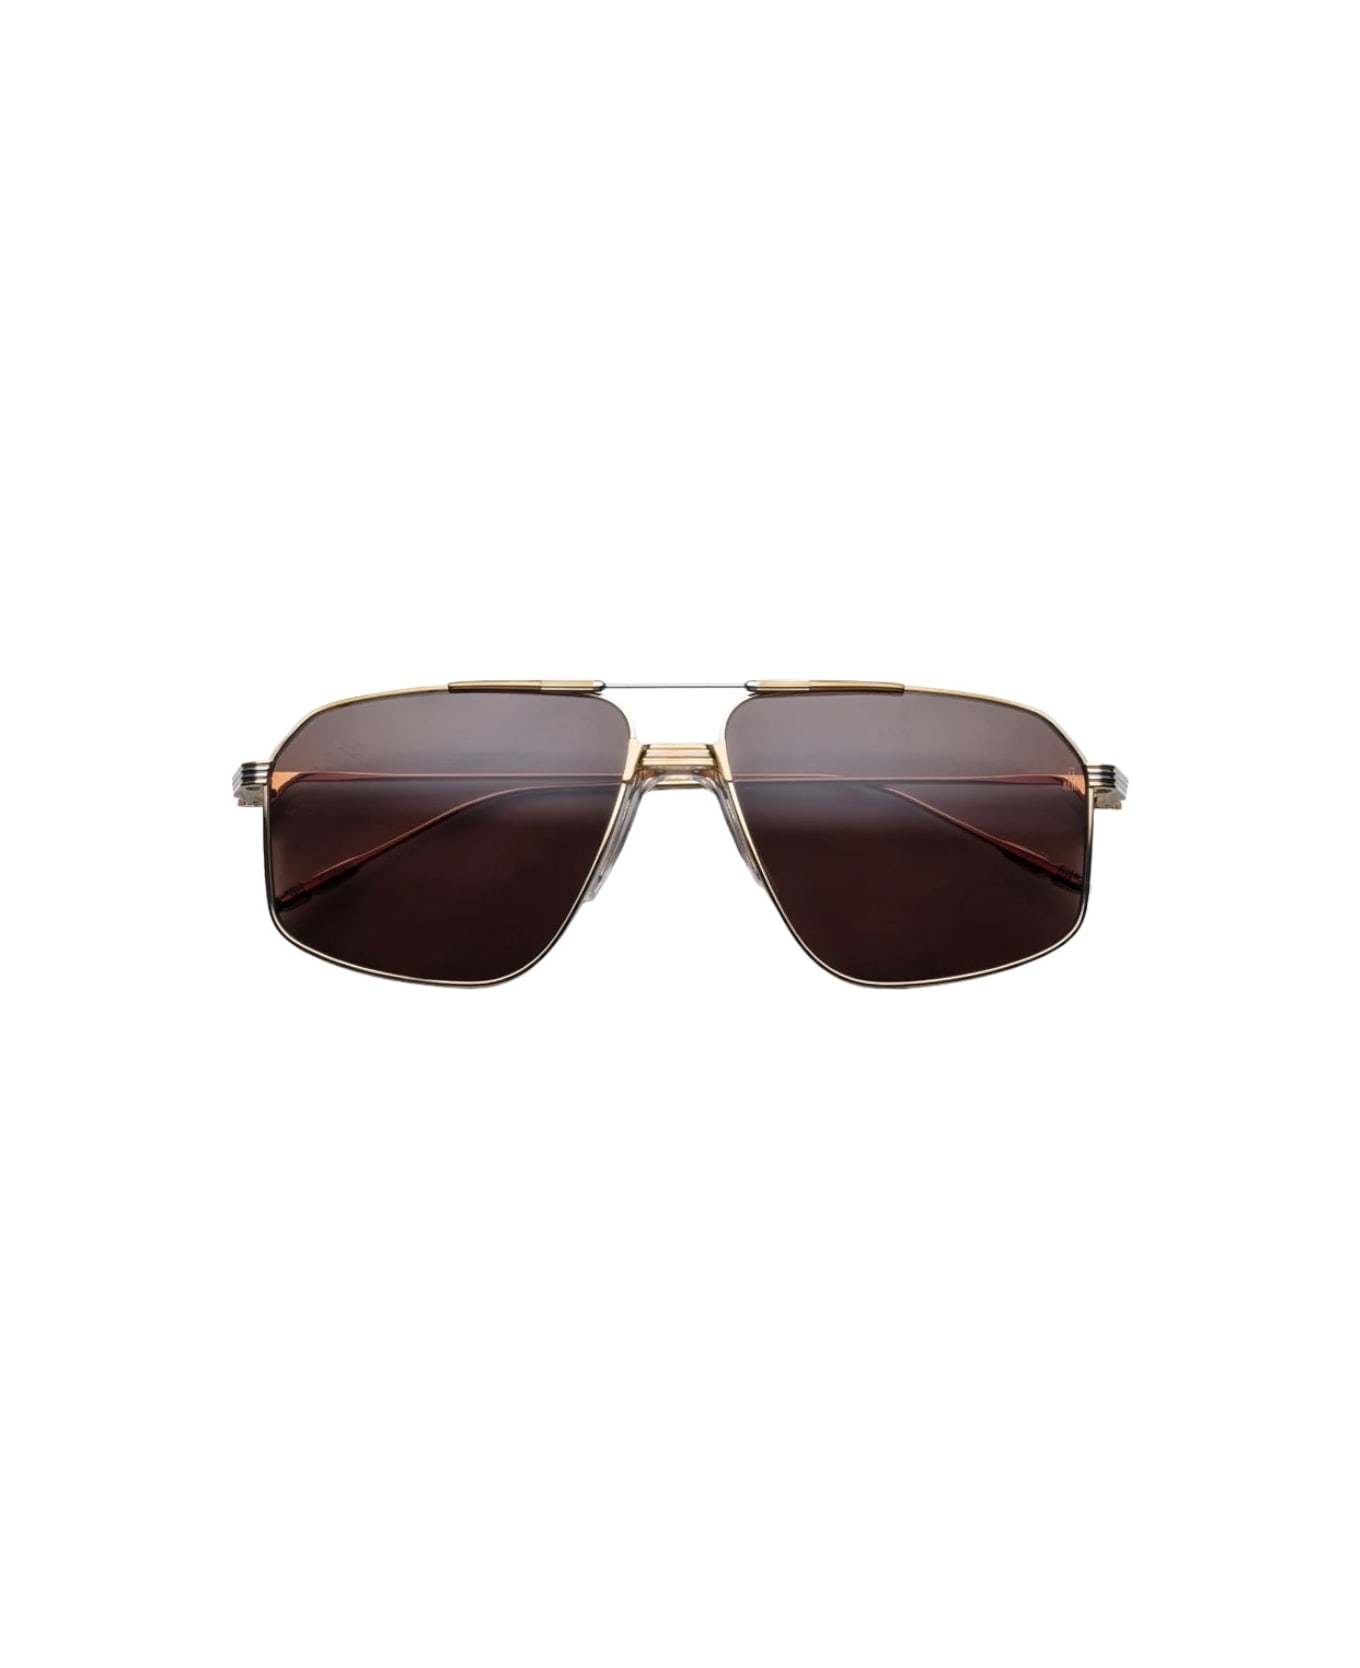 Jacques Marie Mage Jagger - Coco Sunglasses